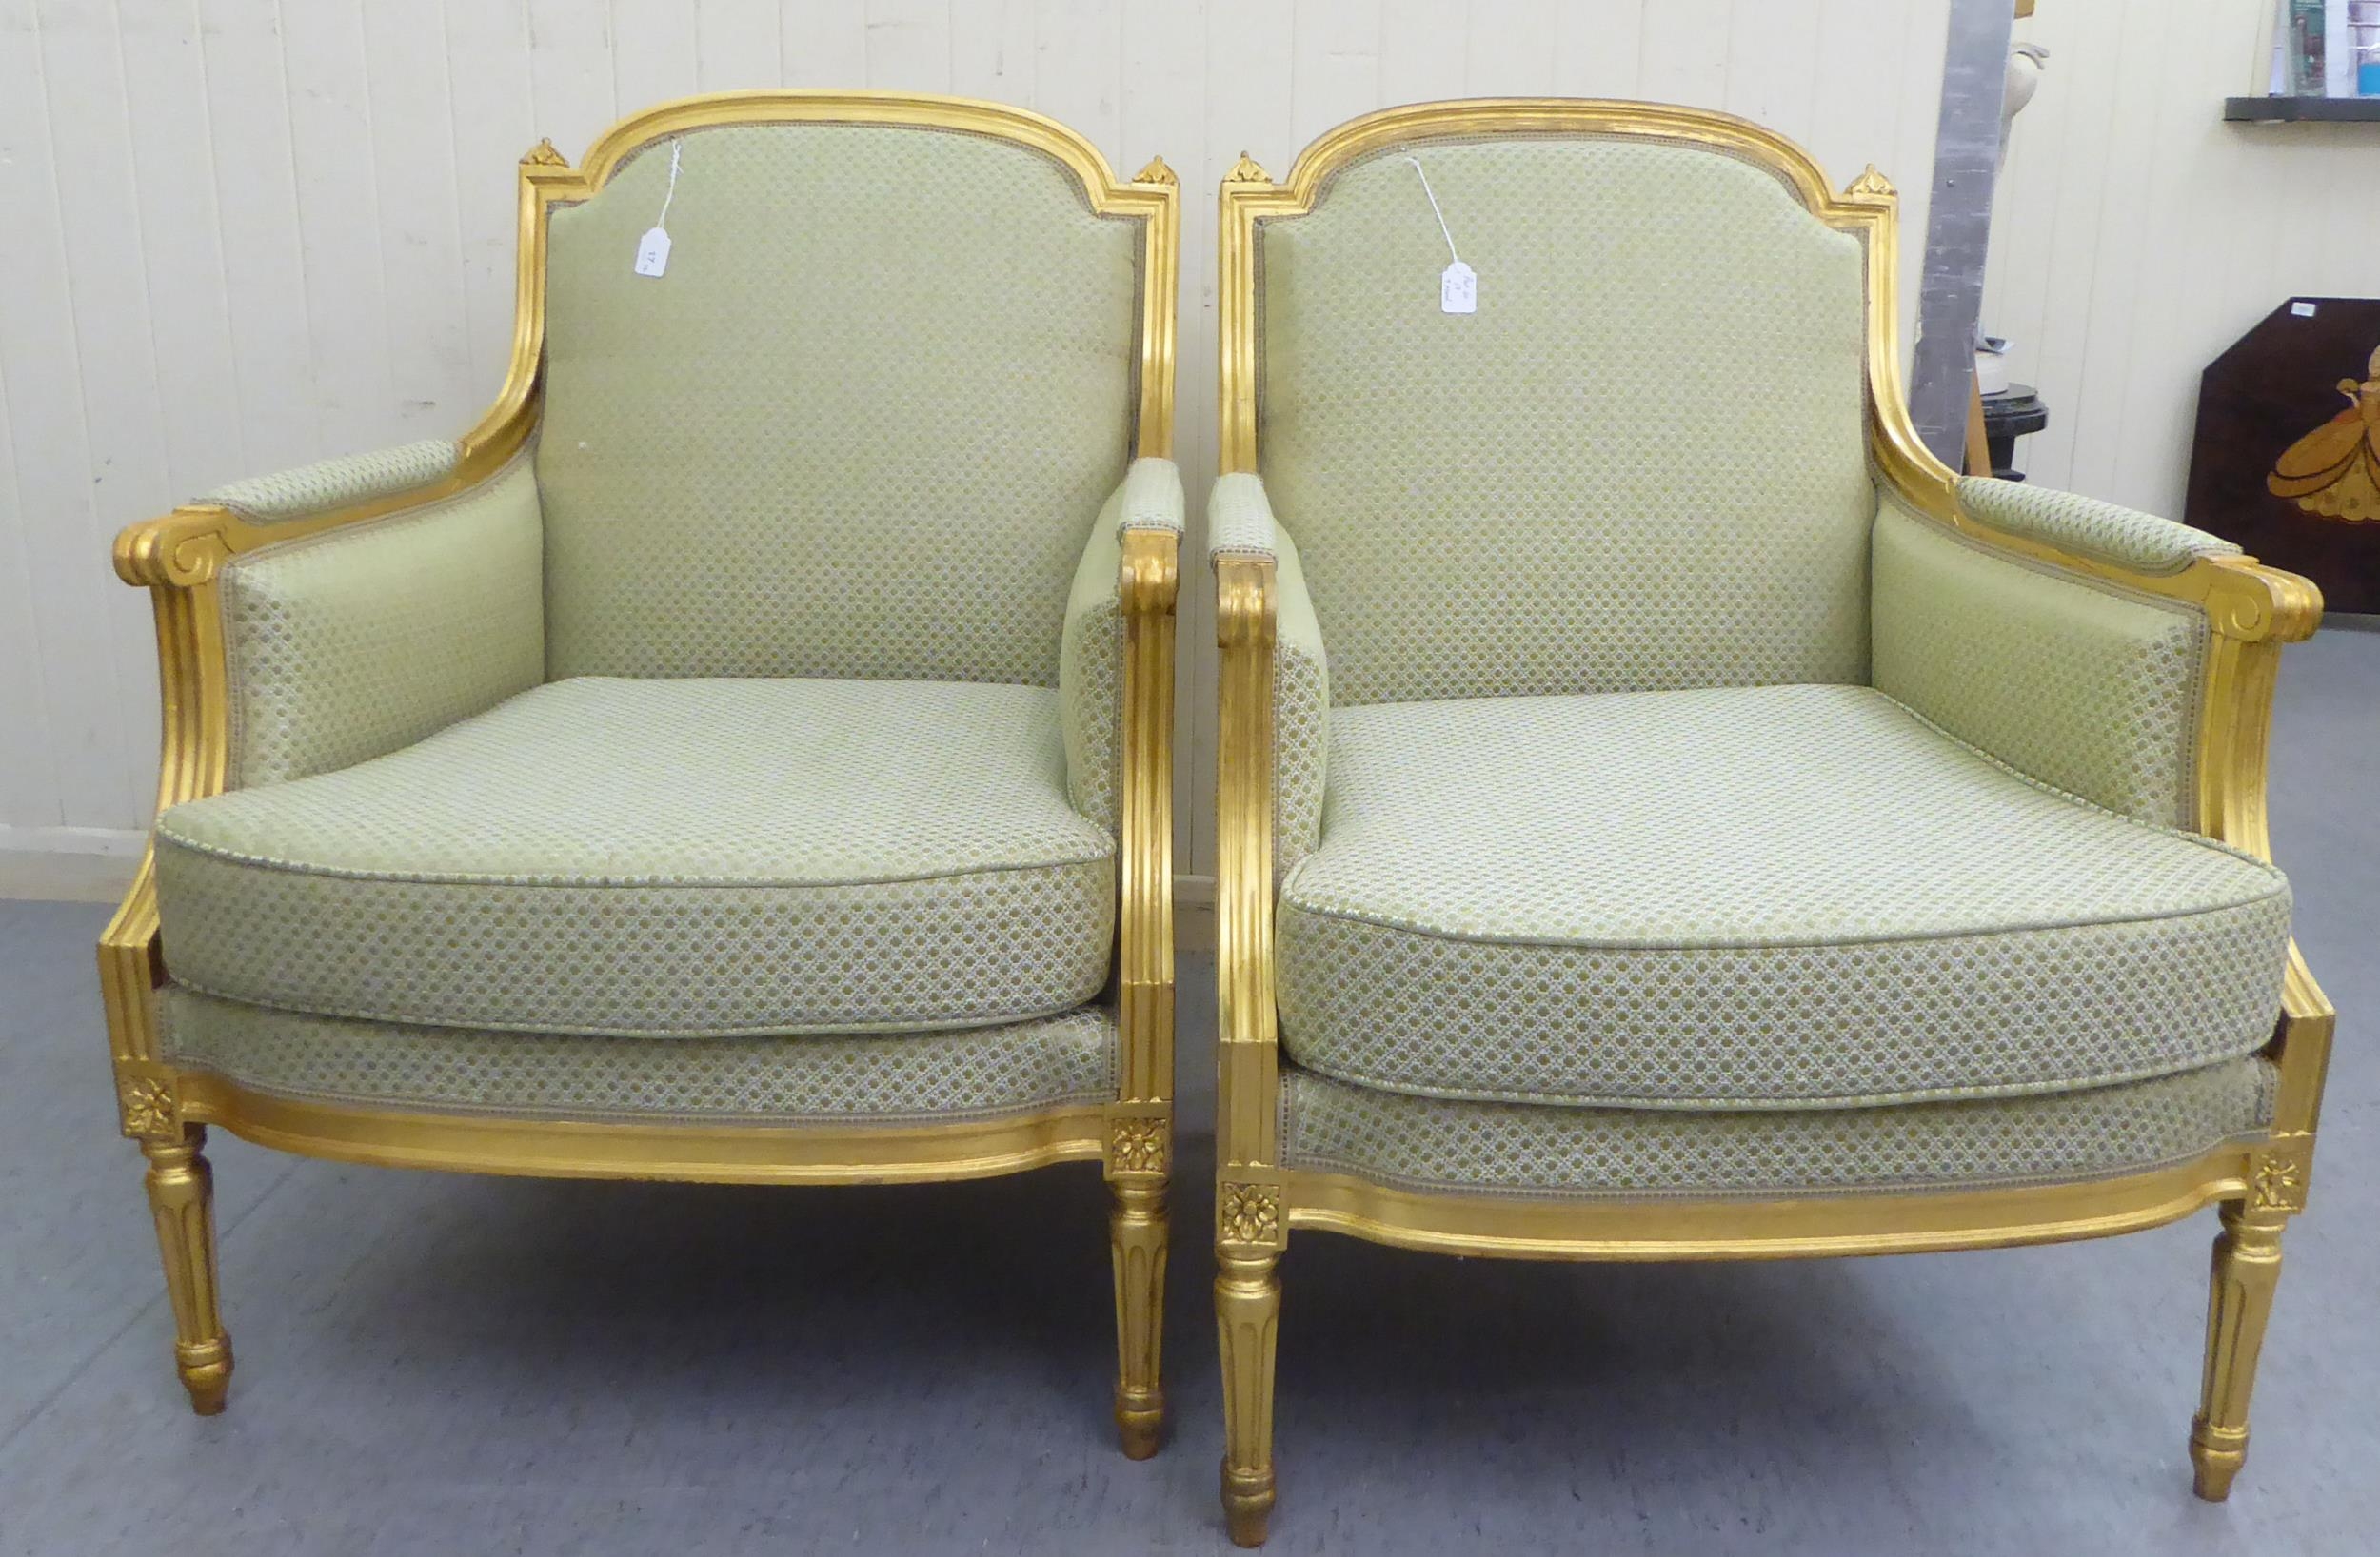 A Pair Of Louis XVI Style Antique Finished Gilded Show Wood Framed Enclosed Salon Chairs,